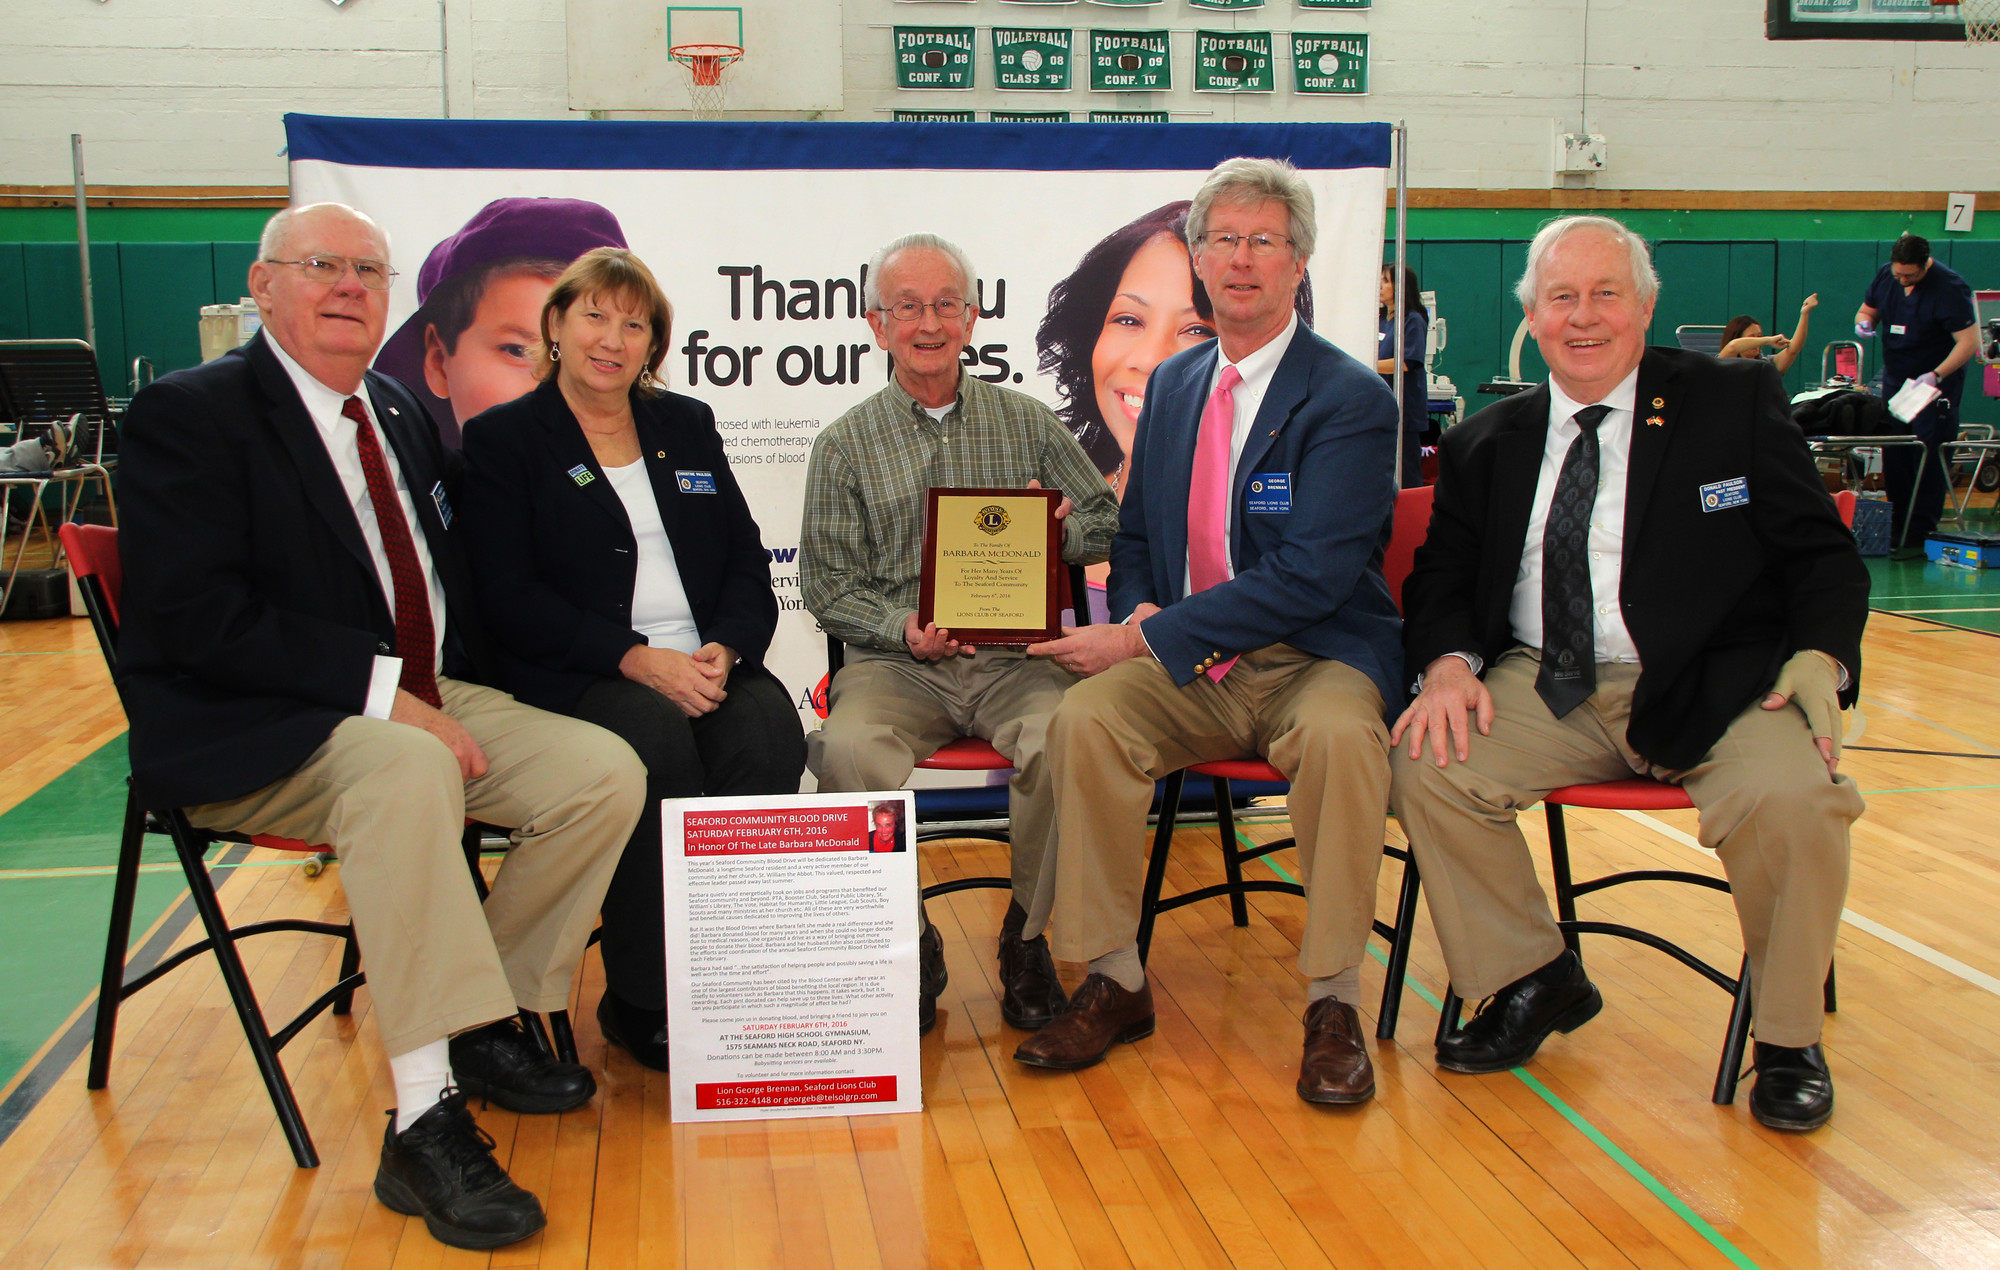 John McDonald, center, received a plaque from the Lions Club of Seaford on behalf of his wife, Barbara, whom this year’s blood drive was dedicated to. From left are Lions Club President Charlie Wroblewski, and Lions Christine Paulson, George Brennan and Donald Paulson.